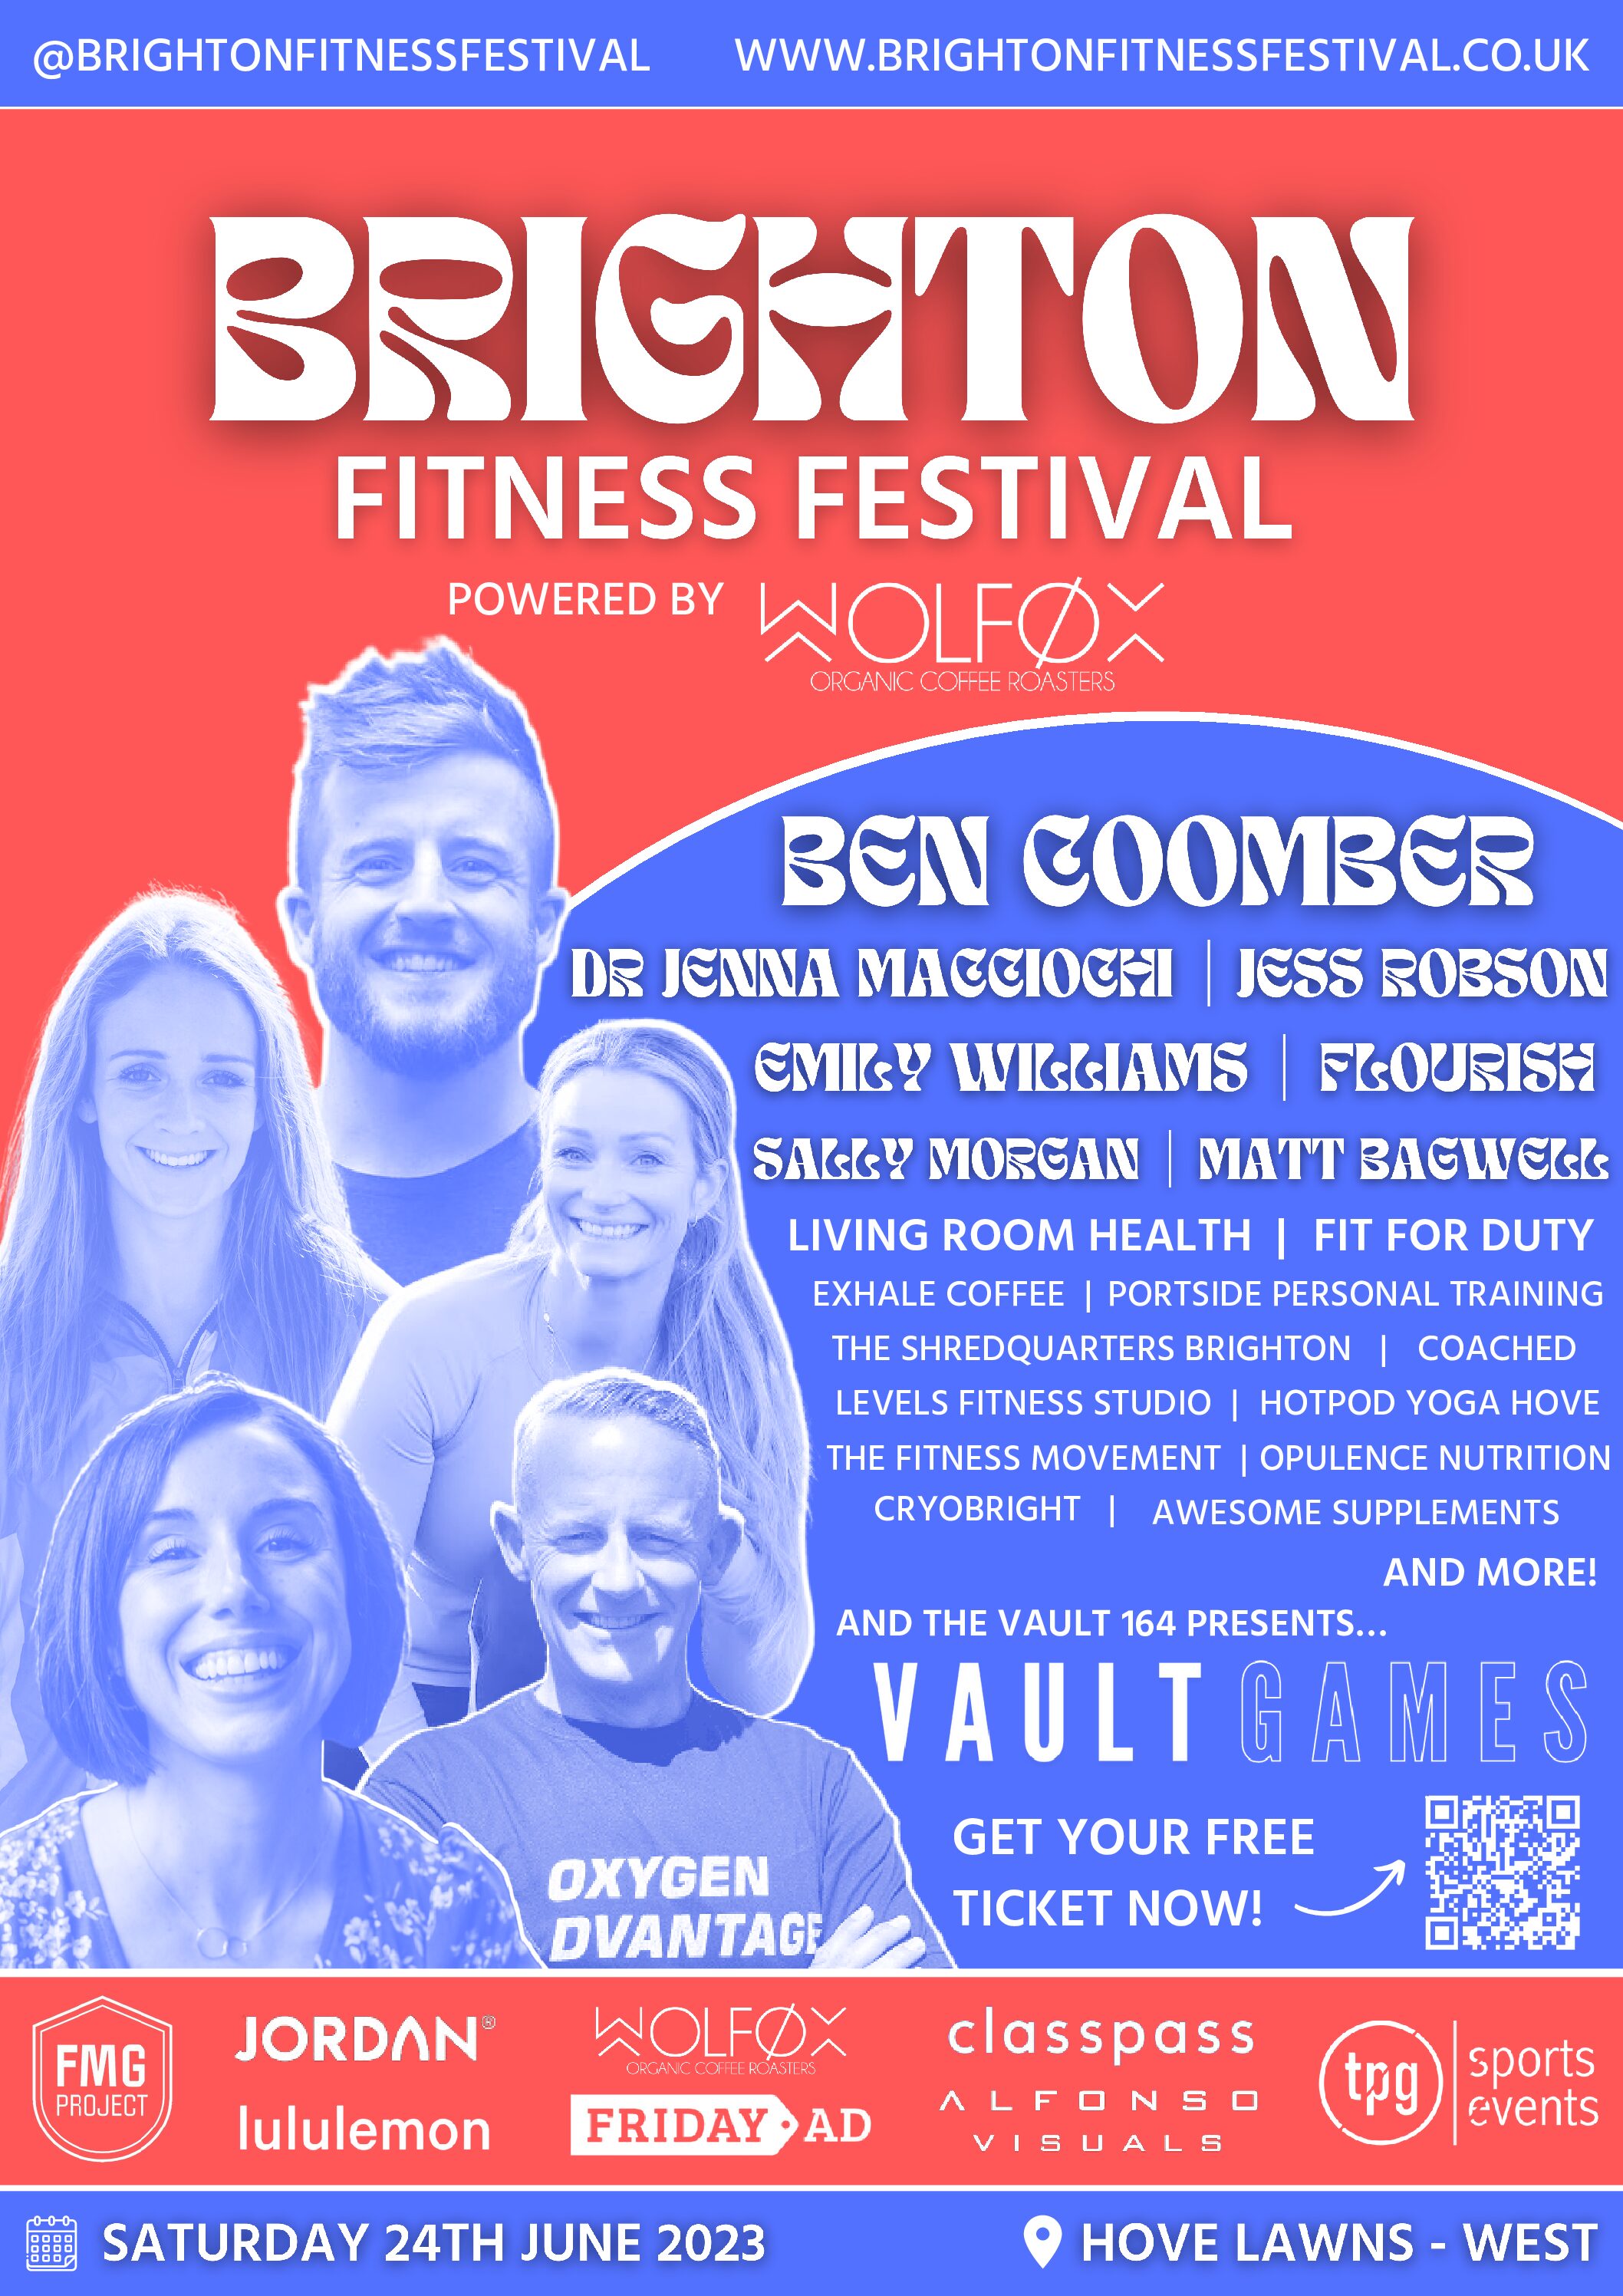 The ‘Brighton Fitness Festival’ comes to Hove Lawns this June!